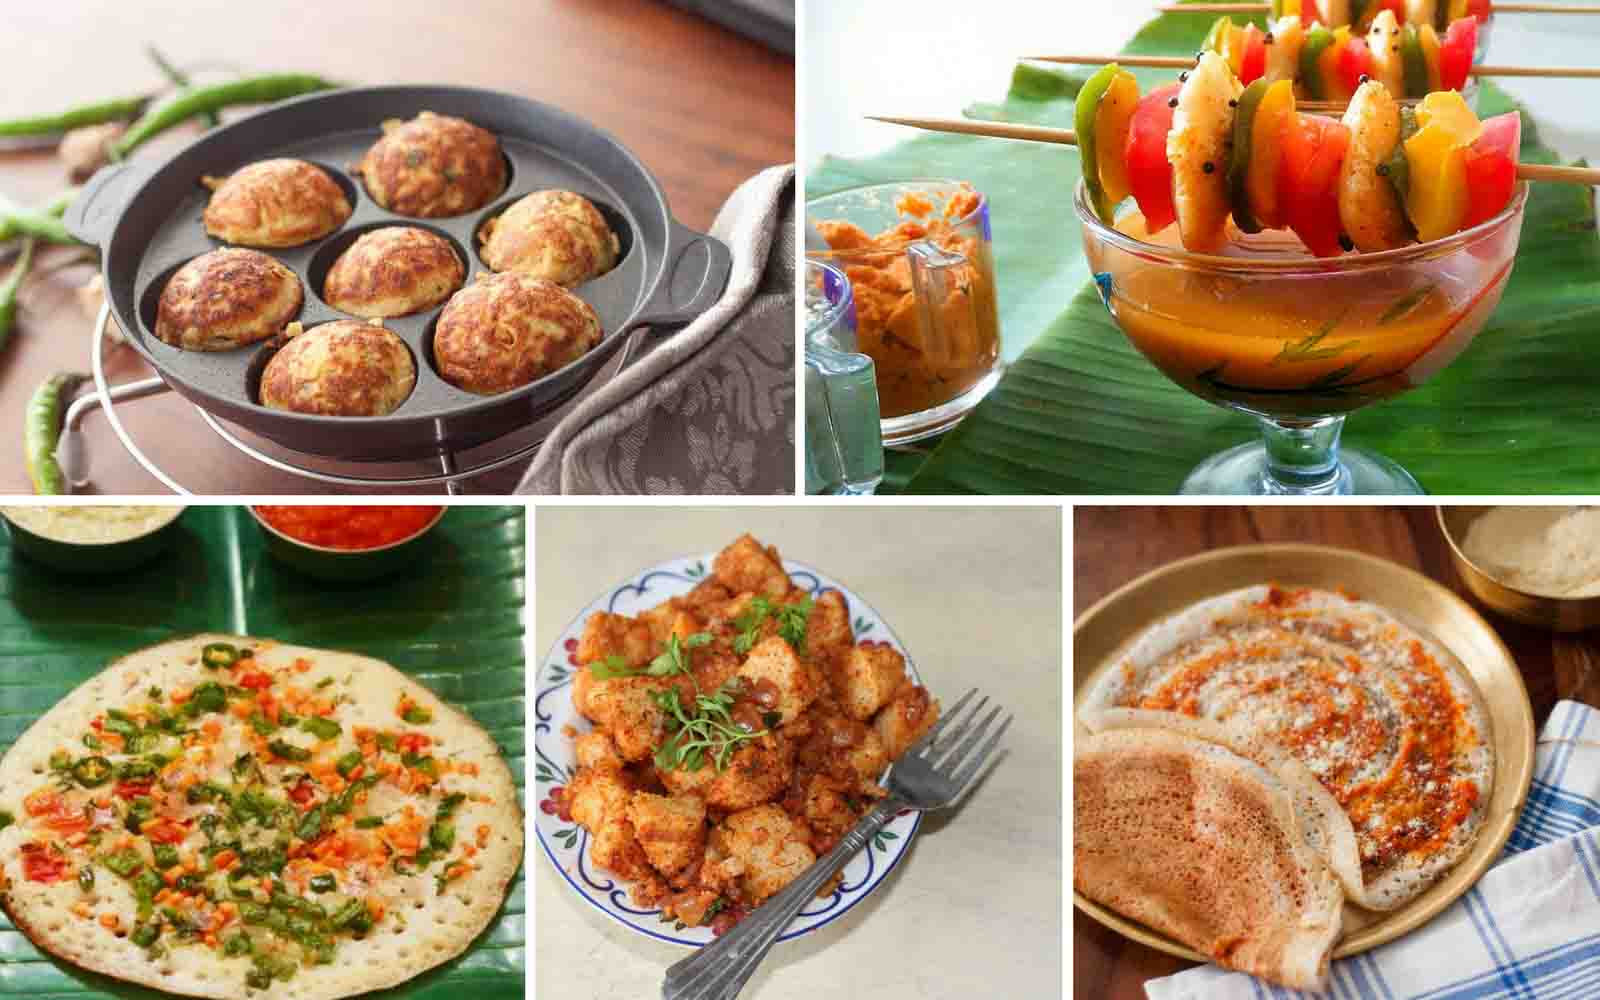 10 Recipes You Can Make With Leftover Idli Dosa Batter by Archana's Kitchen